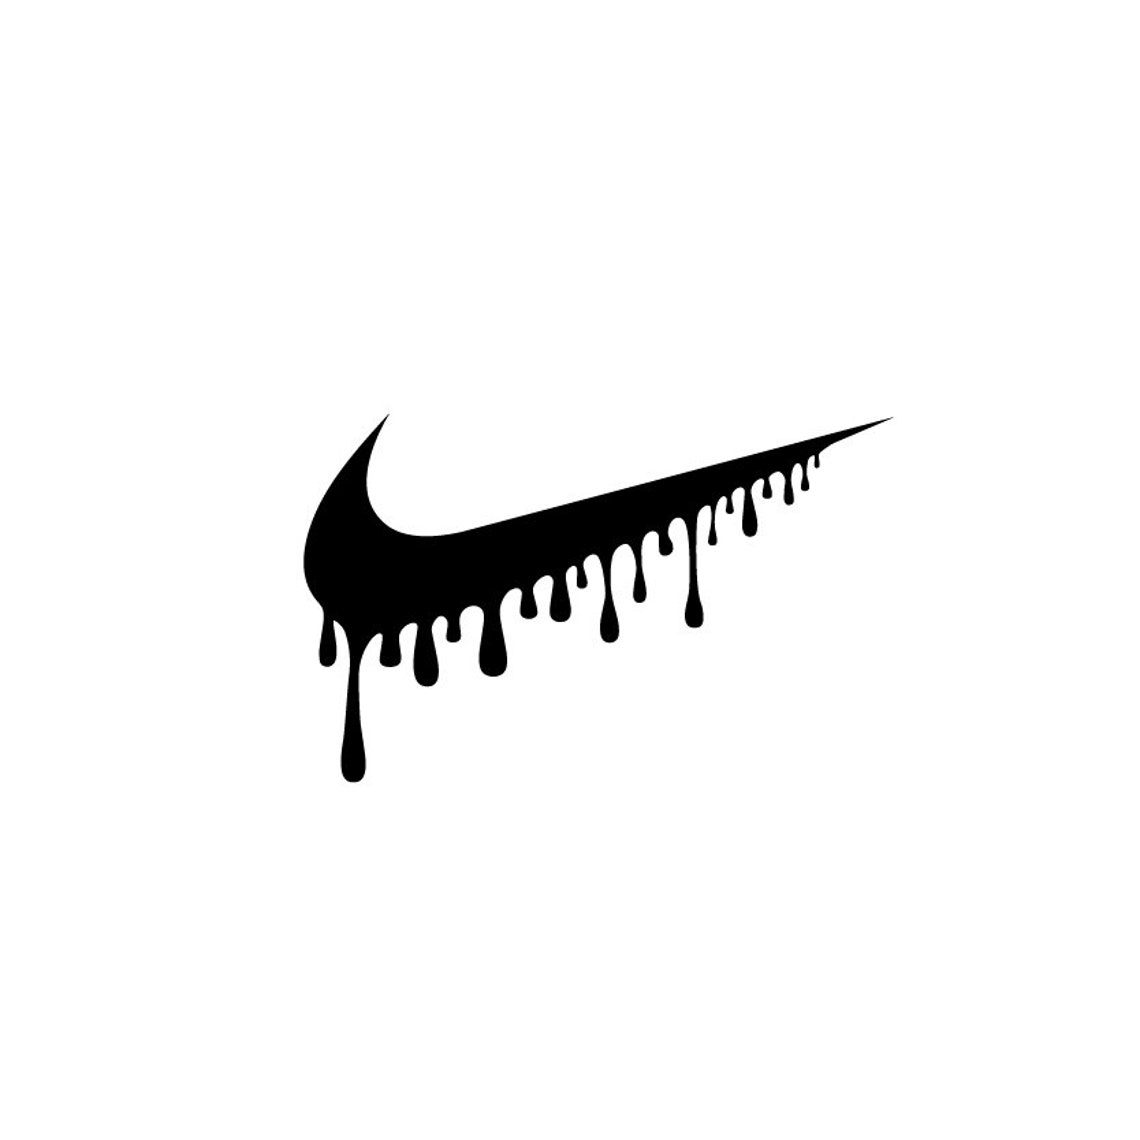 Nike Svg Nike Drip Nike Logo Png Silhouette Clipart Svg Etsy Images ...